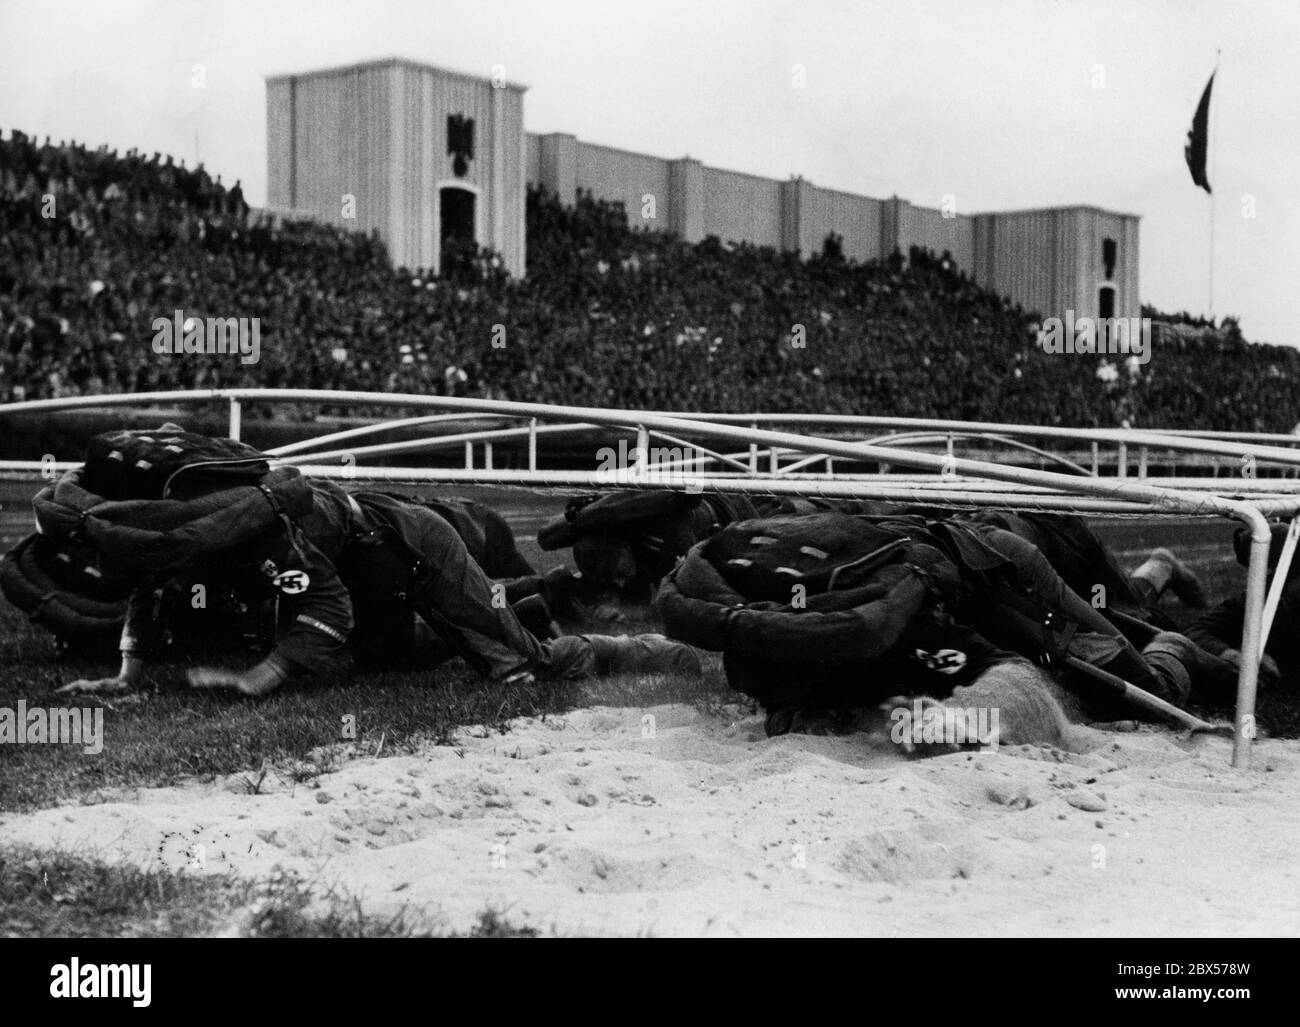 SA members crawl with their knapsacks on their backs. This competition takes place at the NSDAP Reich Party Congress in Nuremberg. Stock Photo